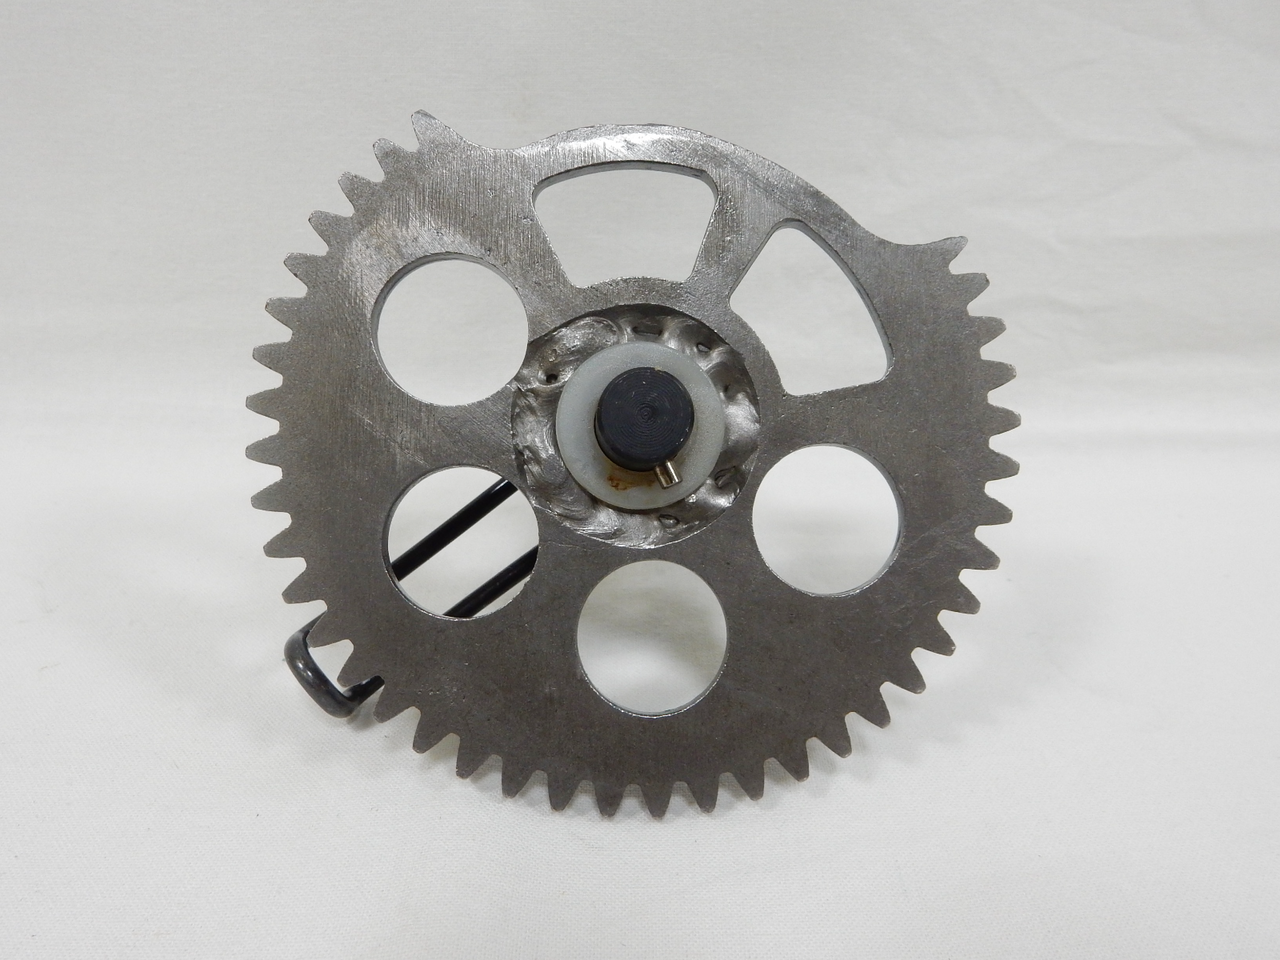 3.85" KICK START IDLE SHAFT GEAR ASSEMBLY GY6 150cc SCOOTERS ATVS KARTS